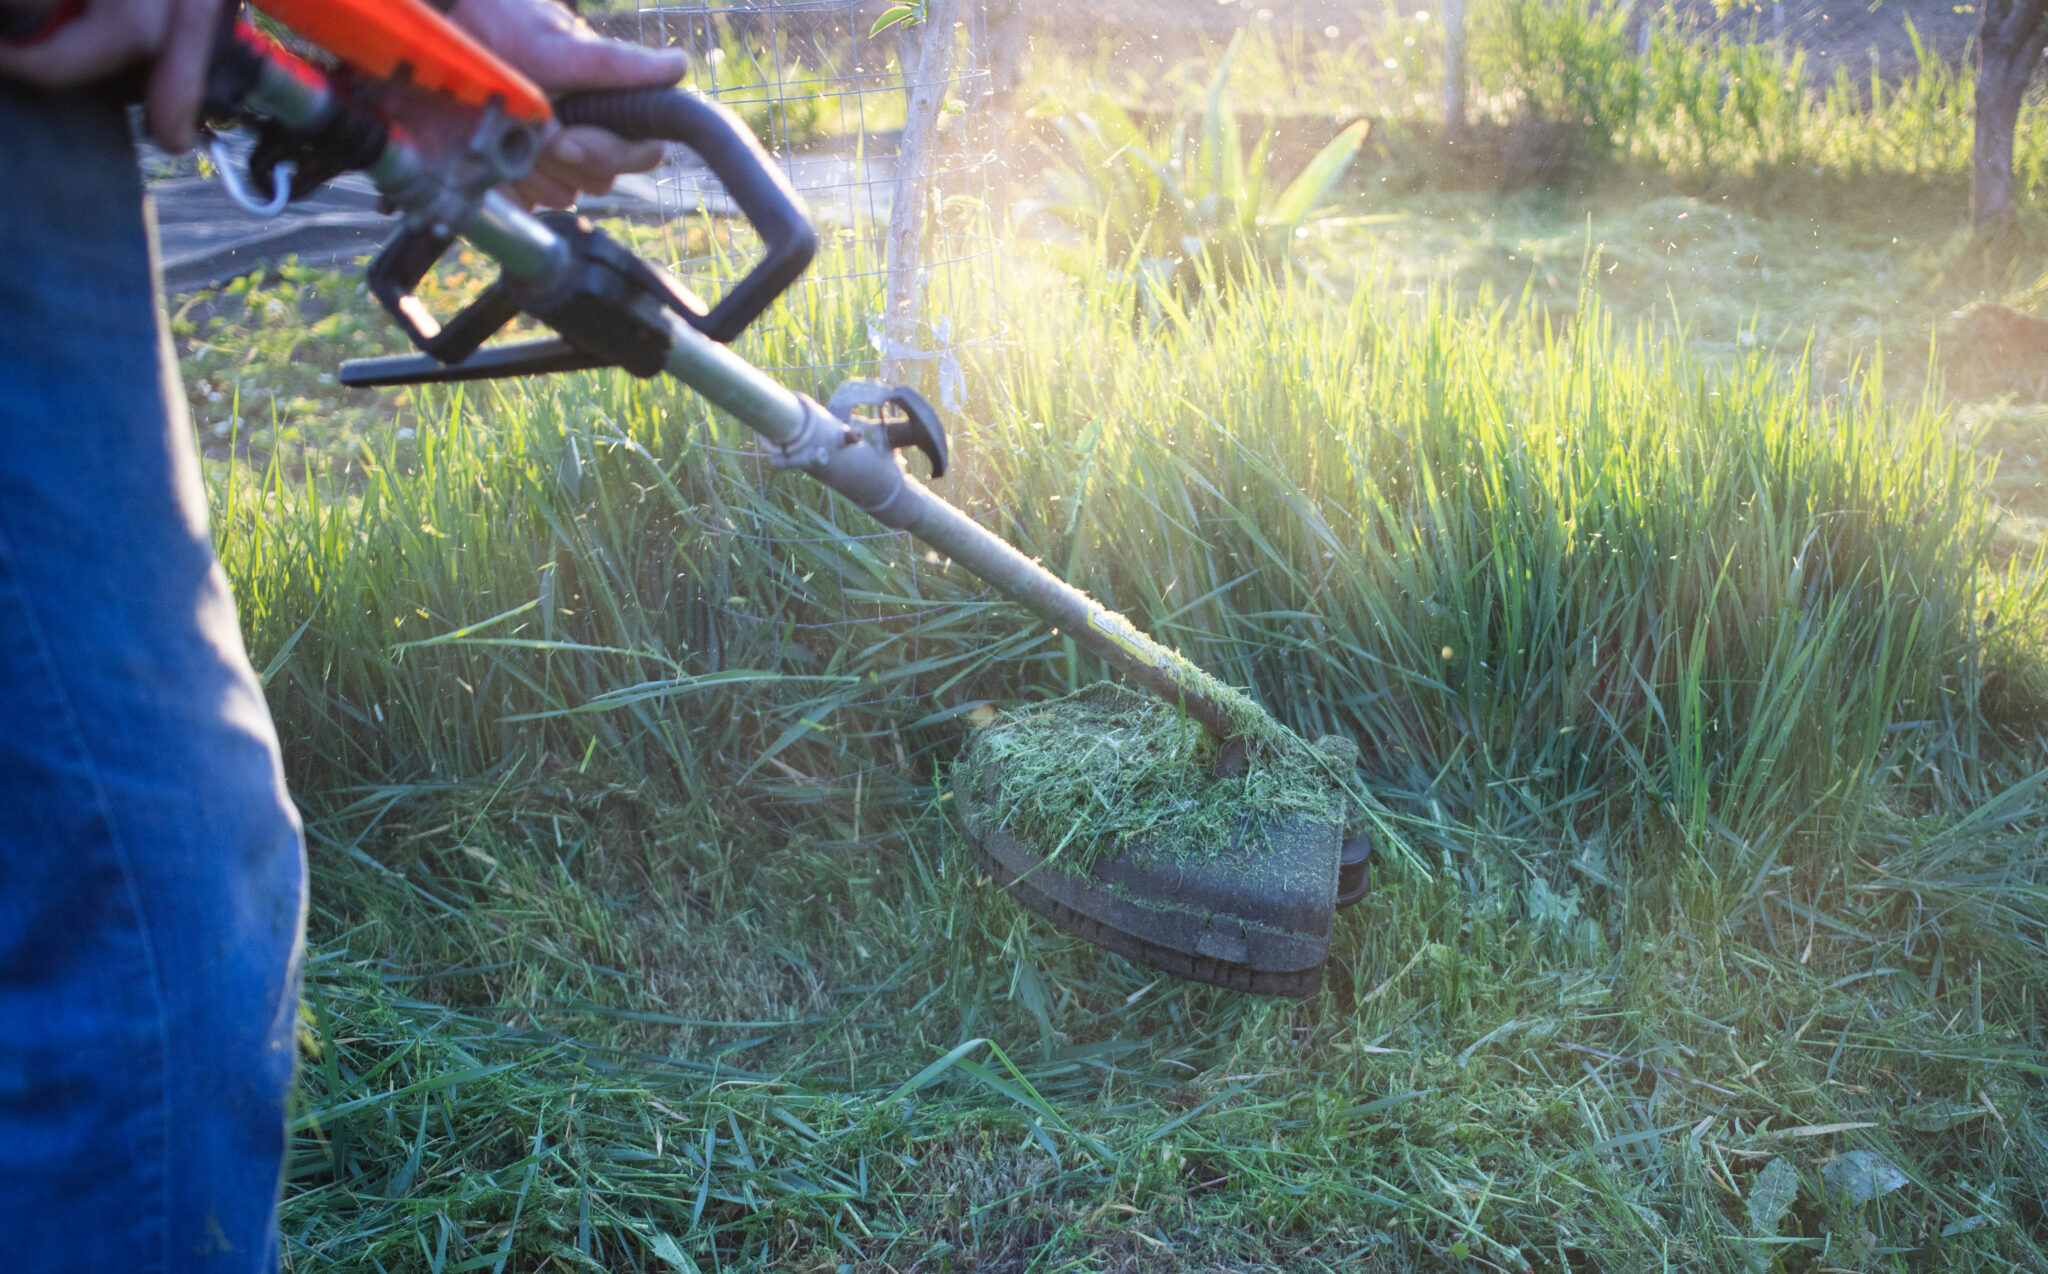 Lawn Maintenance help in Chester Springs, PA<br />
